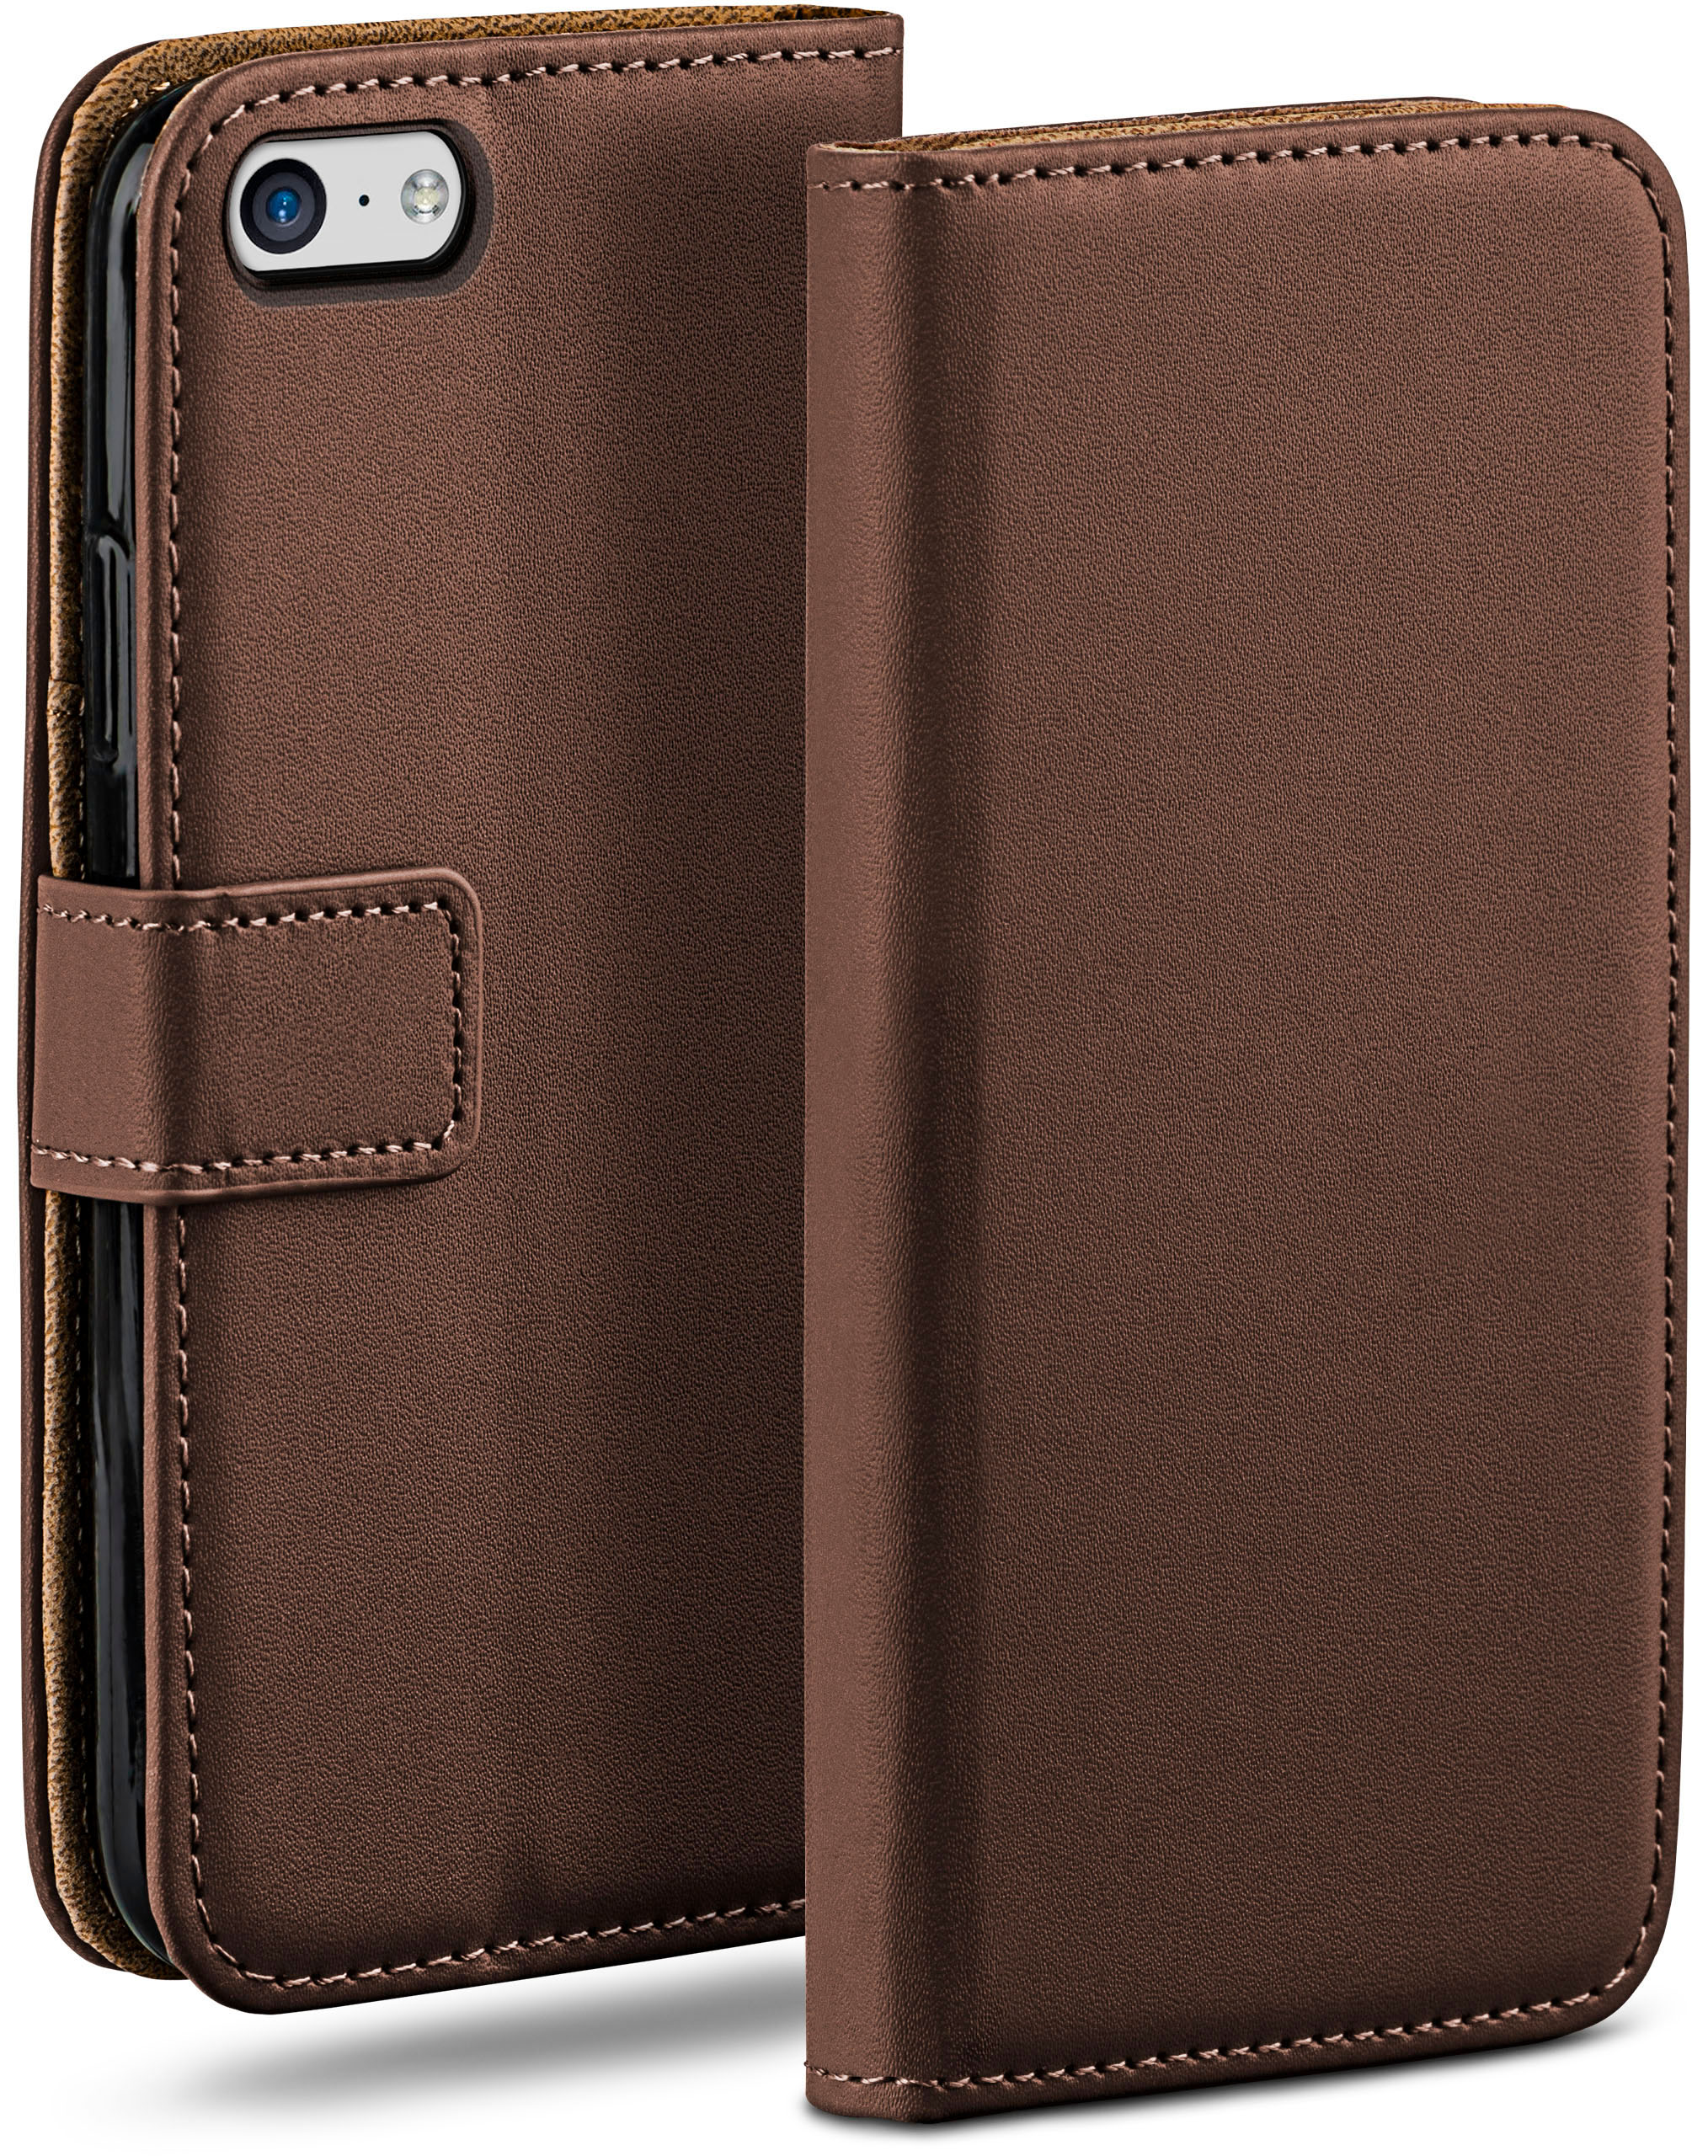 iPhone 5c, Case, MOEX Book Bookcover, Apple, Oxide-Brown